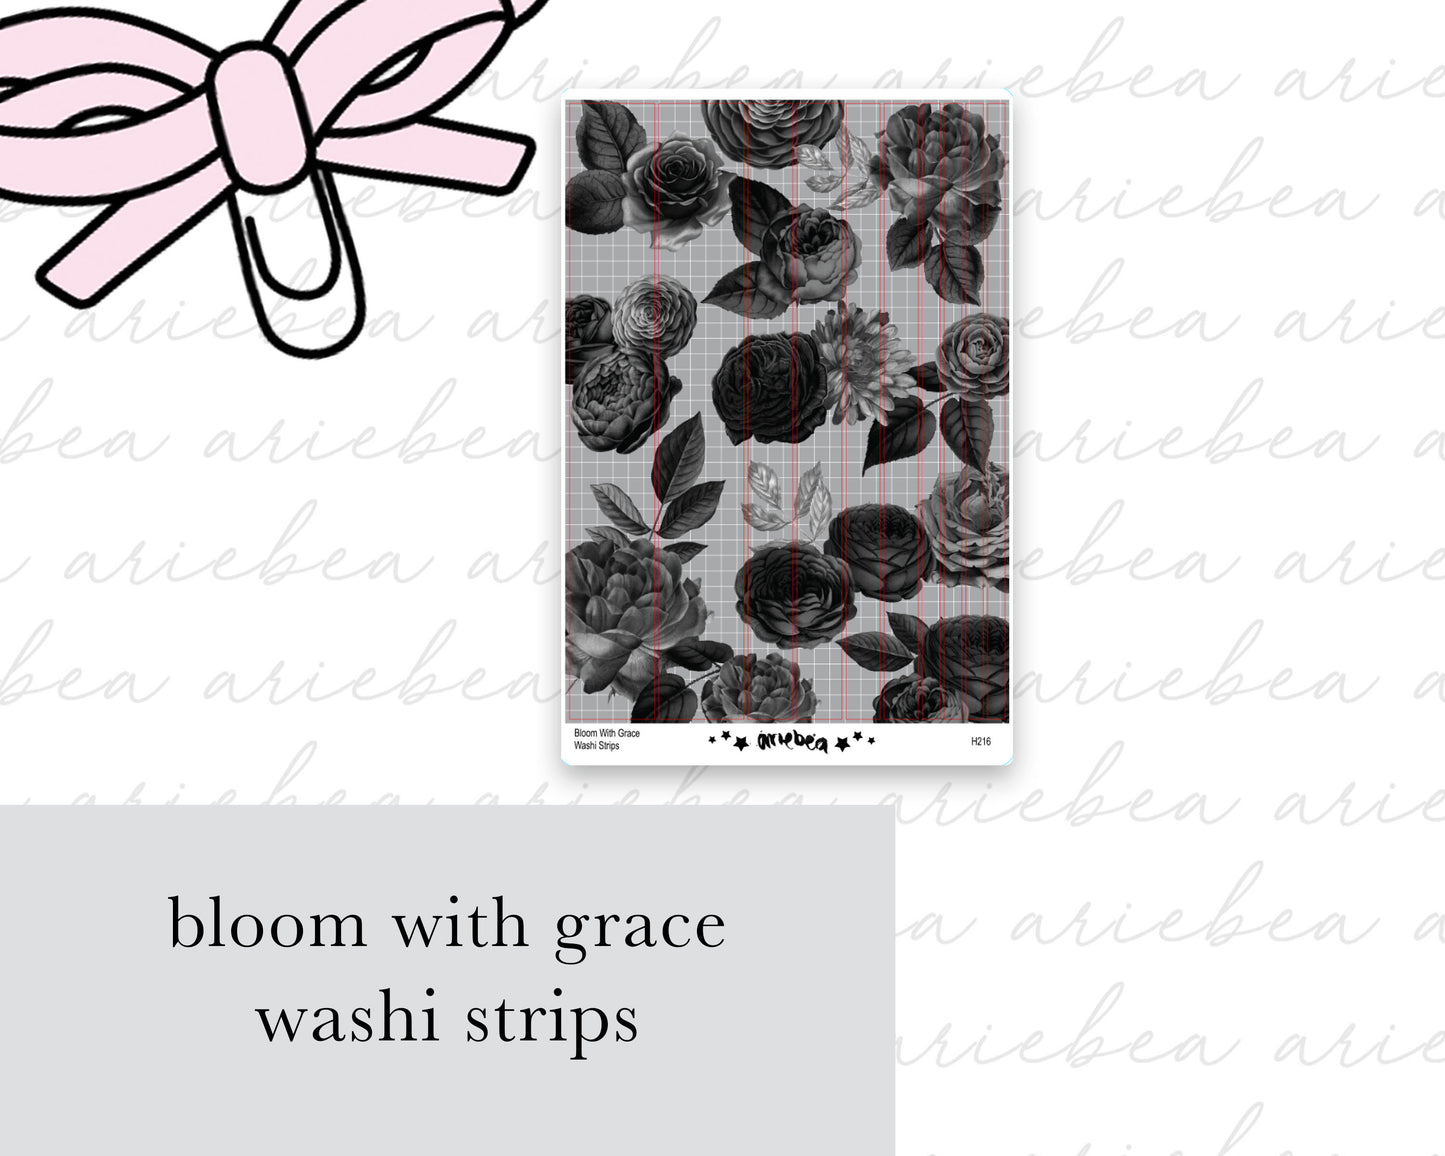 Bloom With Grace Full Mini Kit (4 pages)